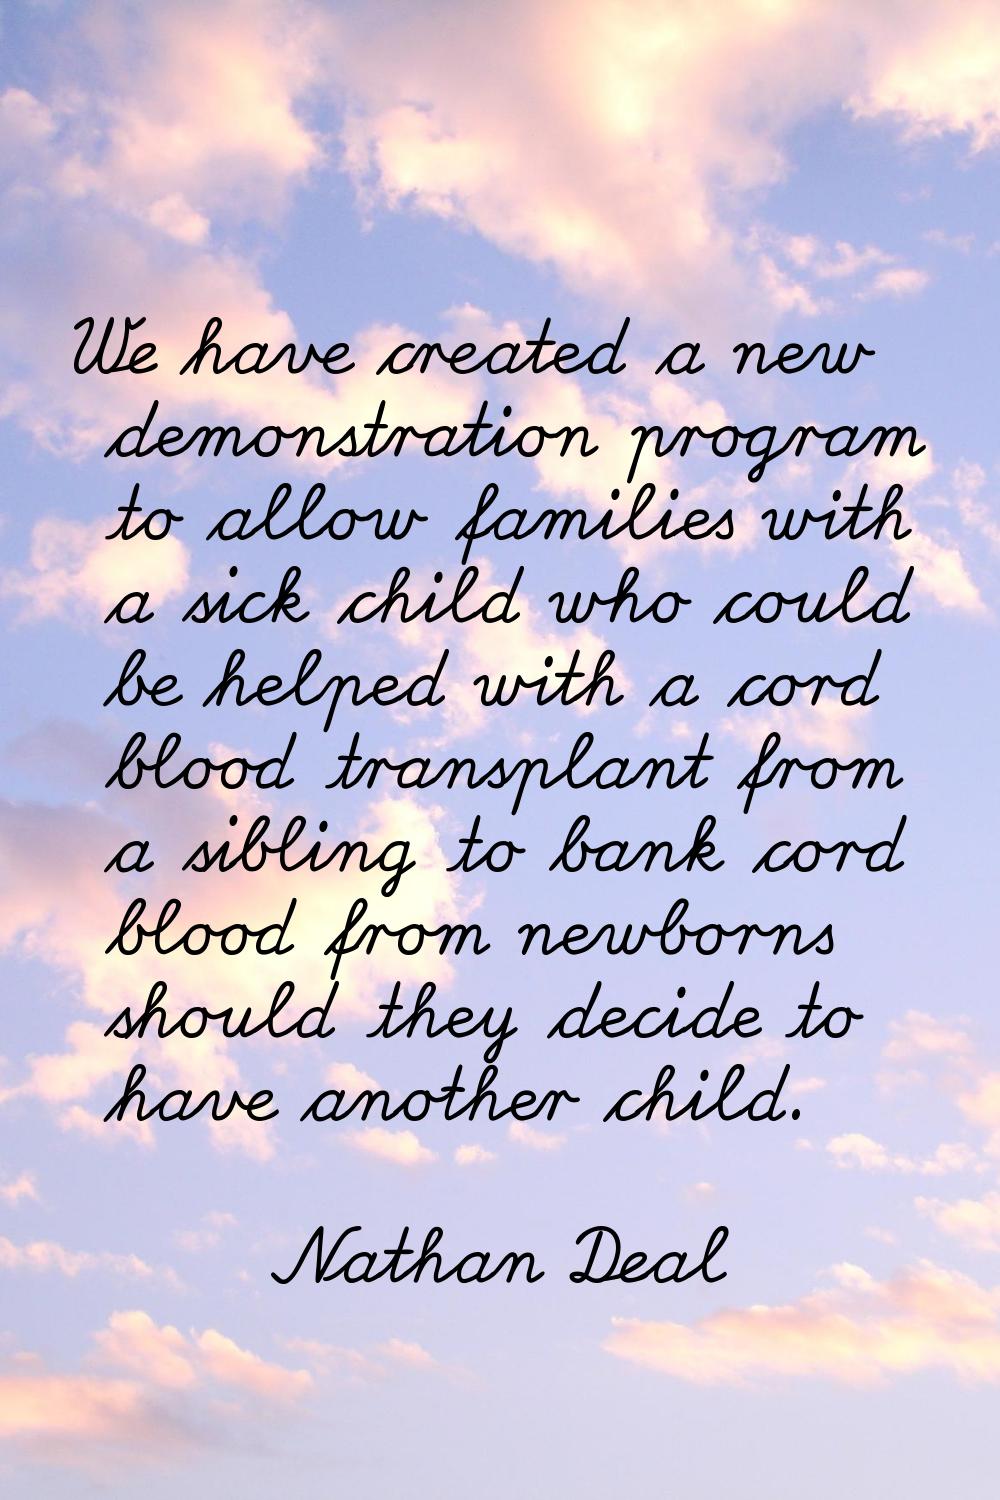 We have created a new demonstration program to allow families with a sick child who could be helped